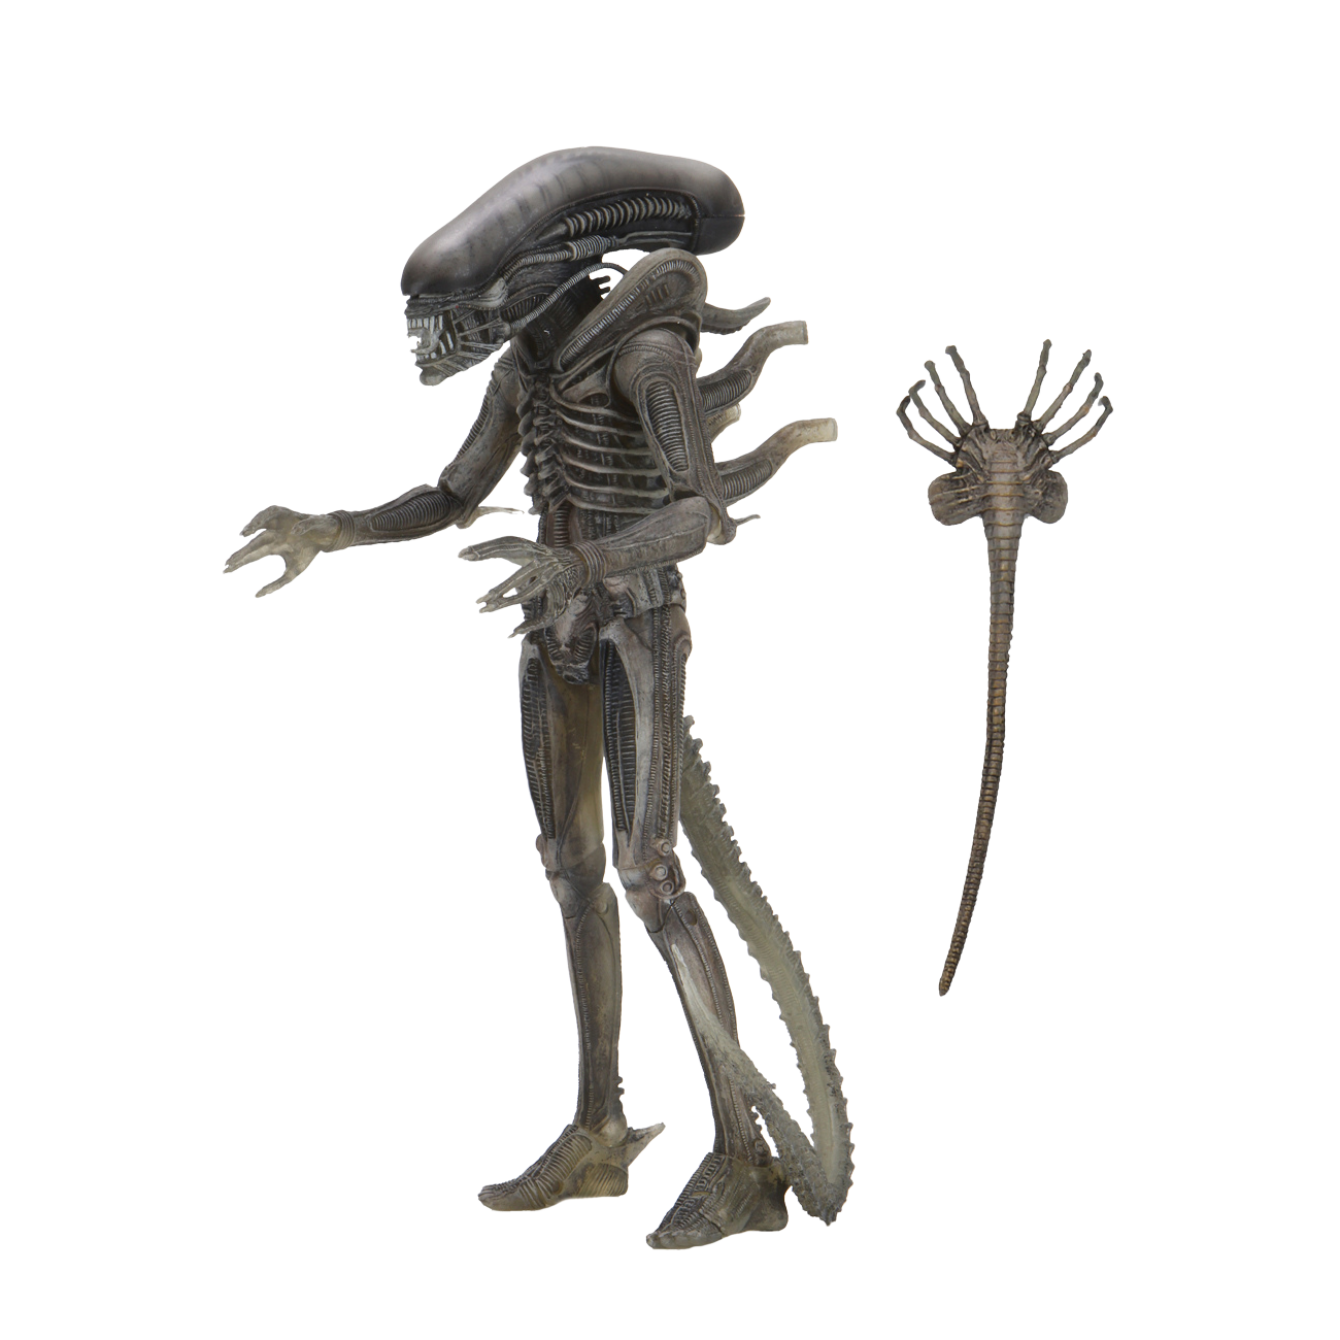 7” Scale Action Figure – 40th Anniversary The Alien Giger